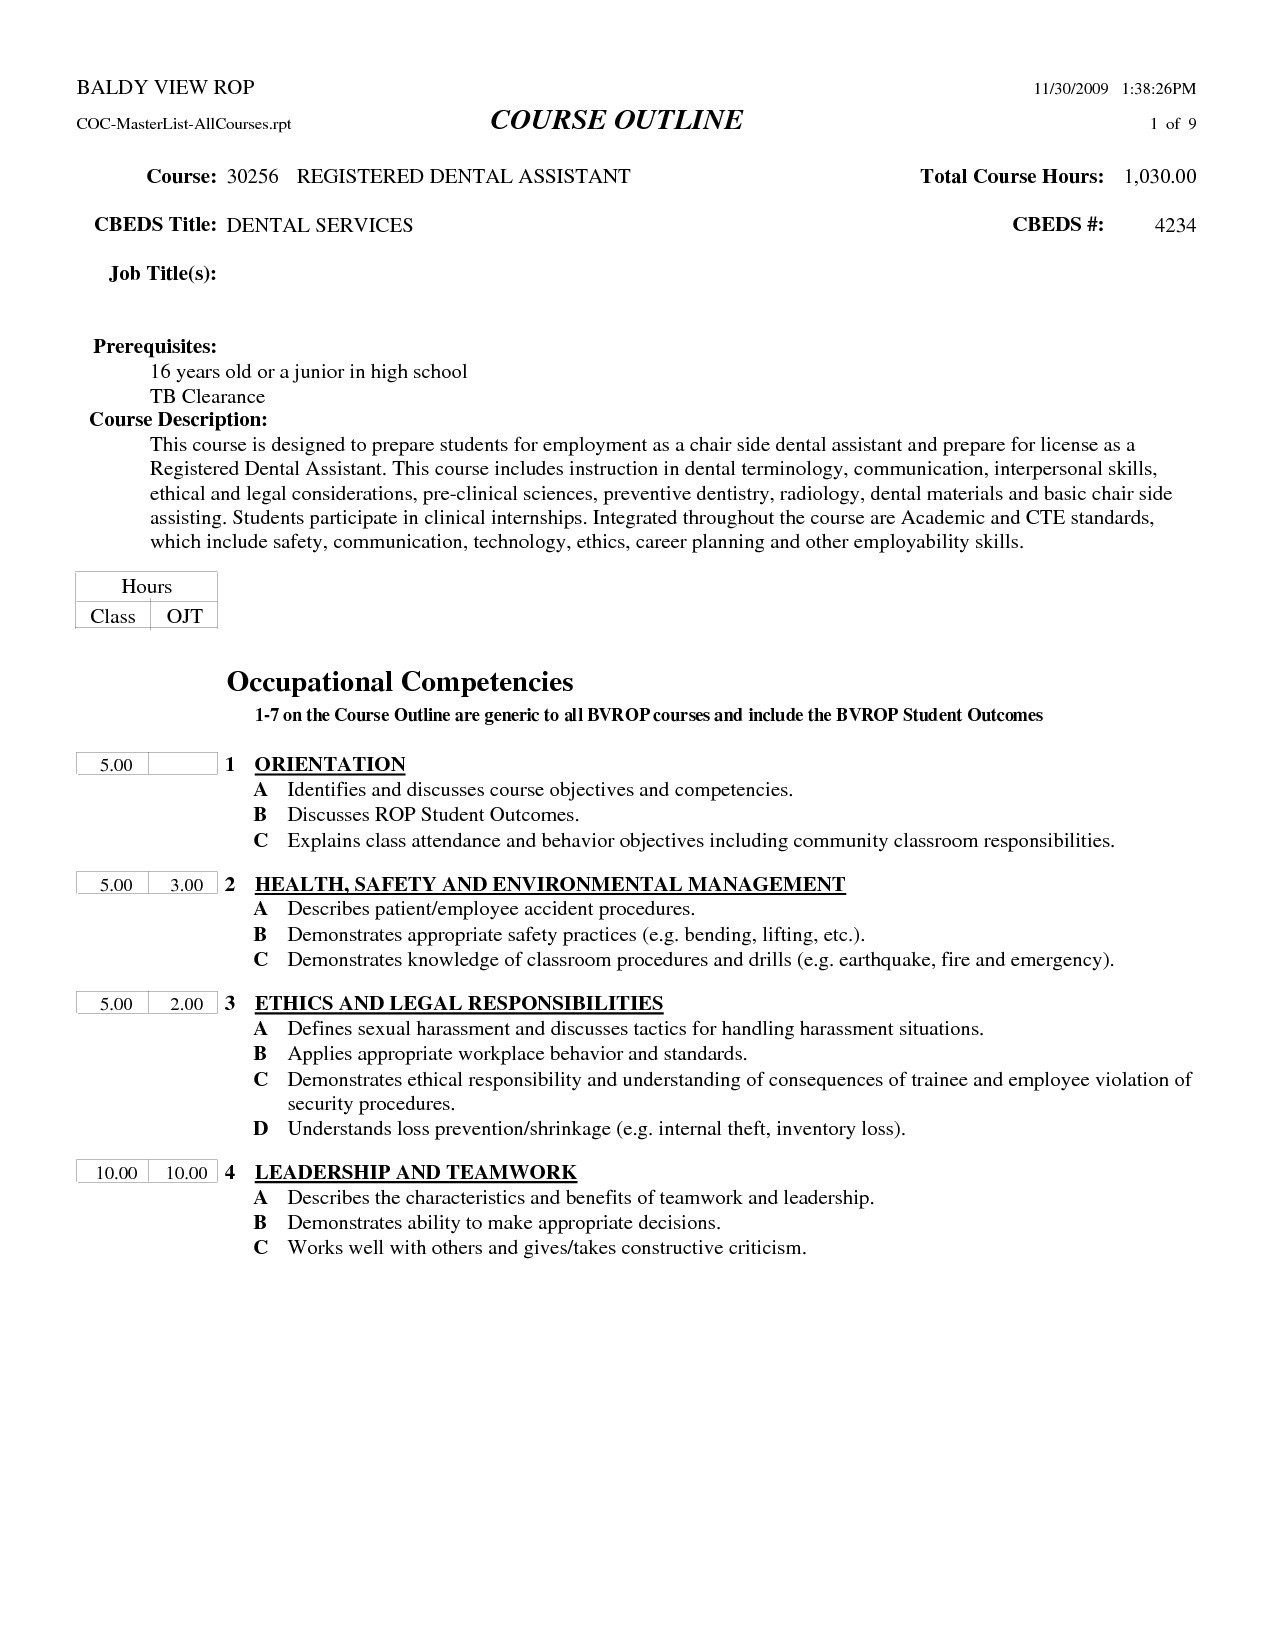 Resume Tips Objective 9 Dental Assistant Resume Objective Examples Resume Database Template